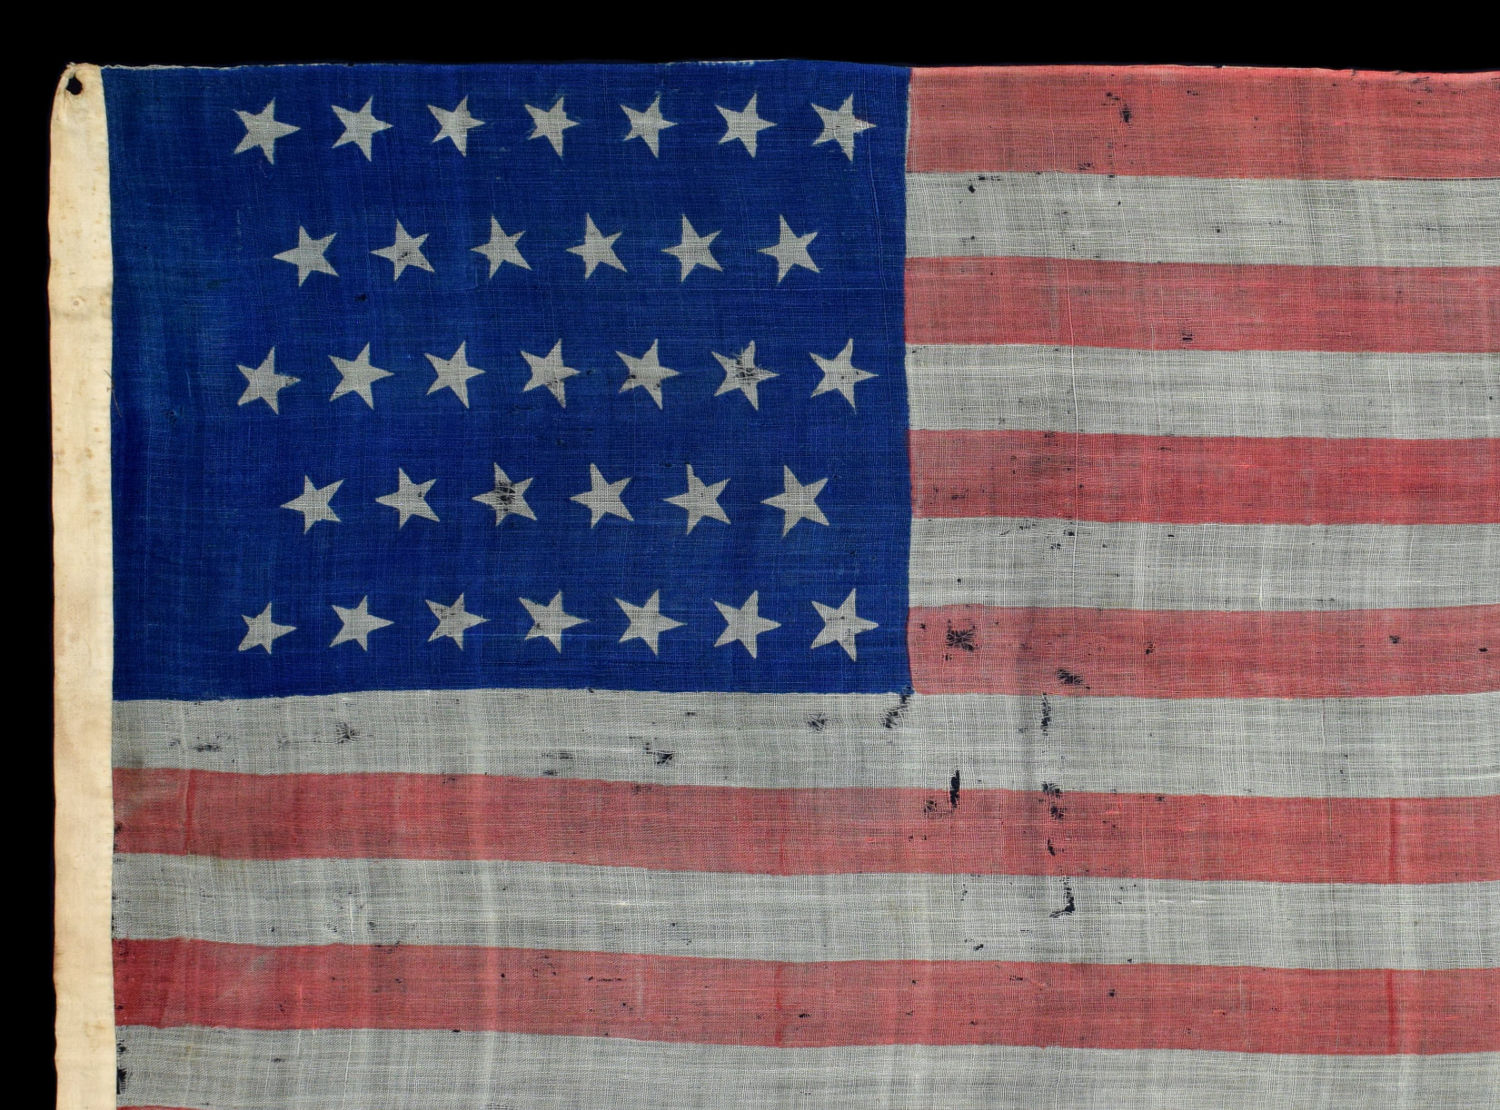 Details about   33 Star US Flag 3x5 ft United States USA American 1859-1861 pre Civil War 